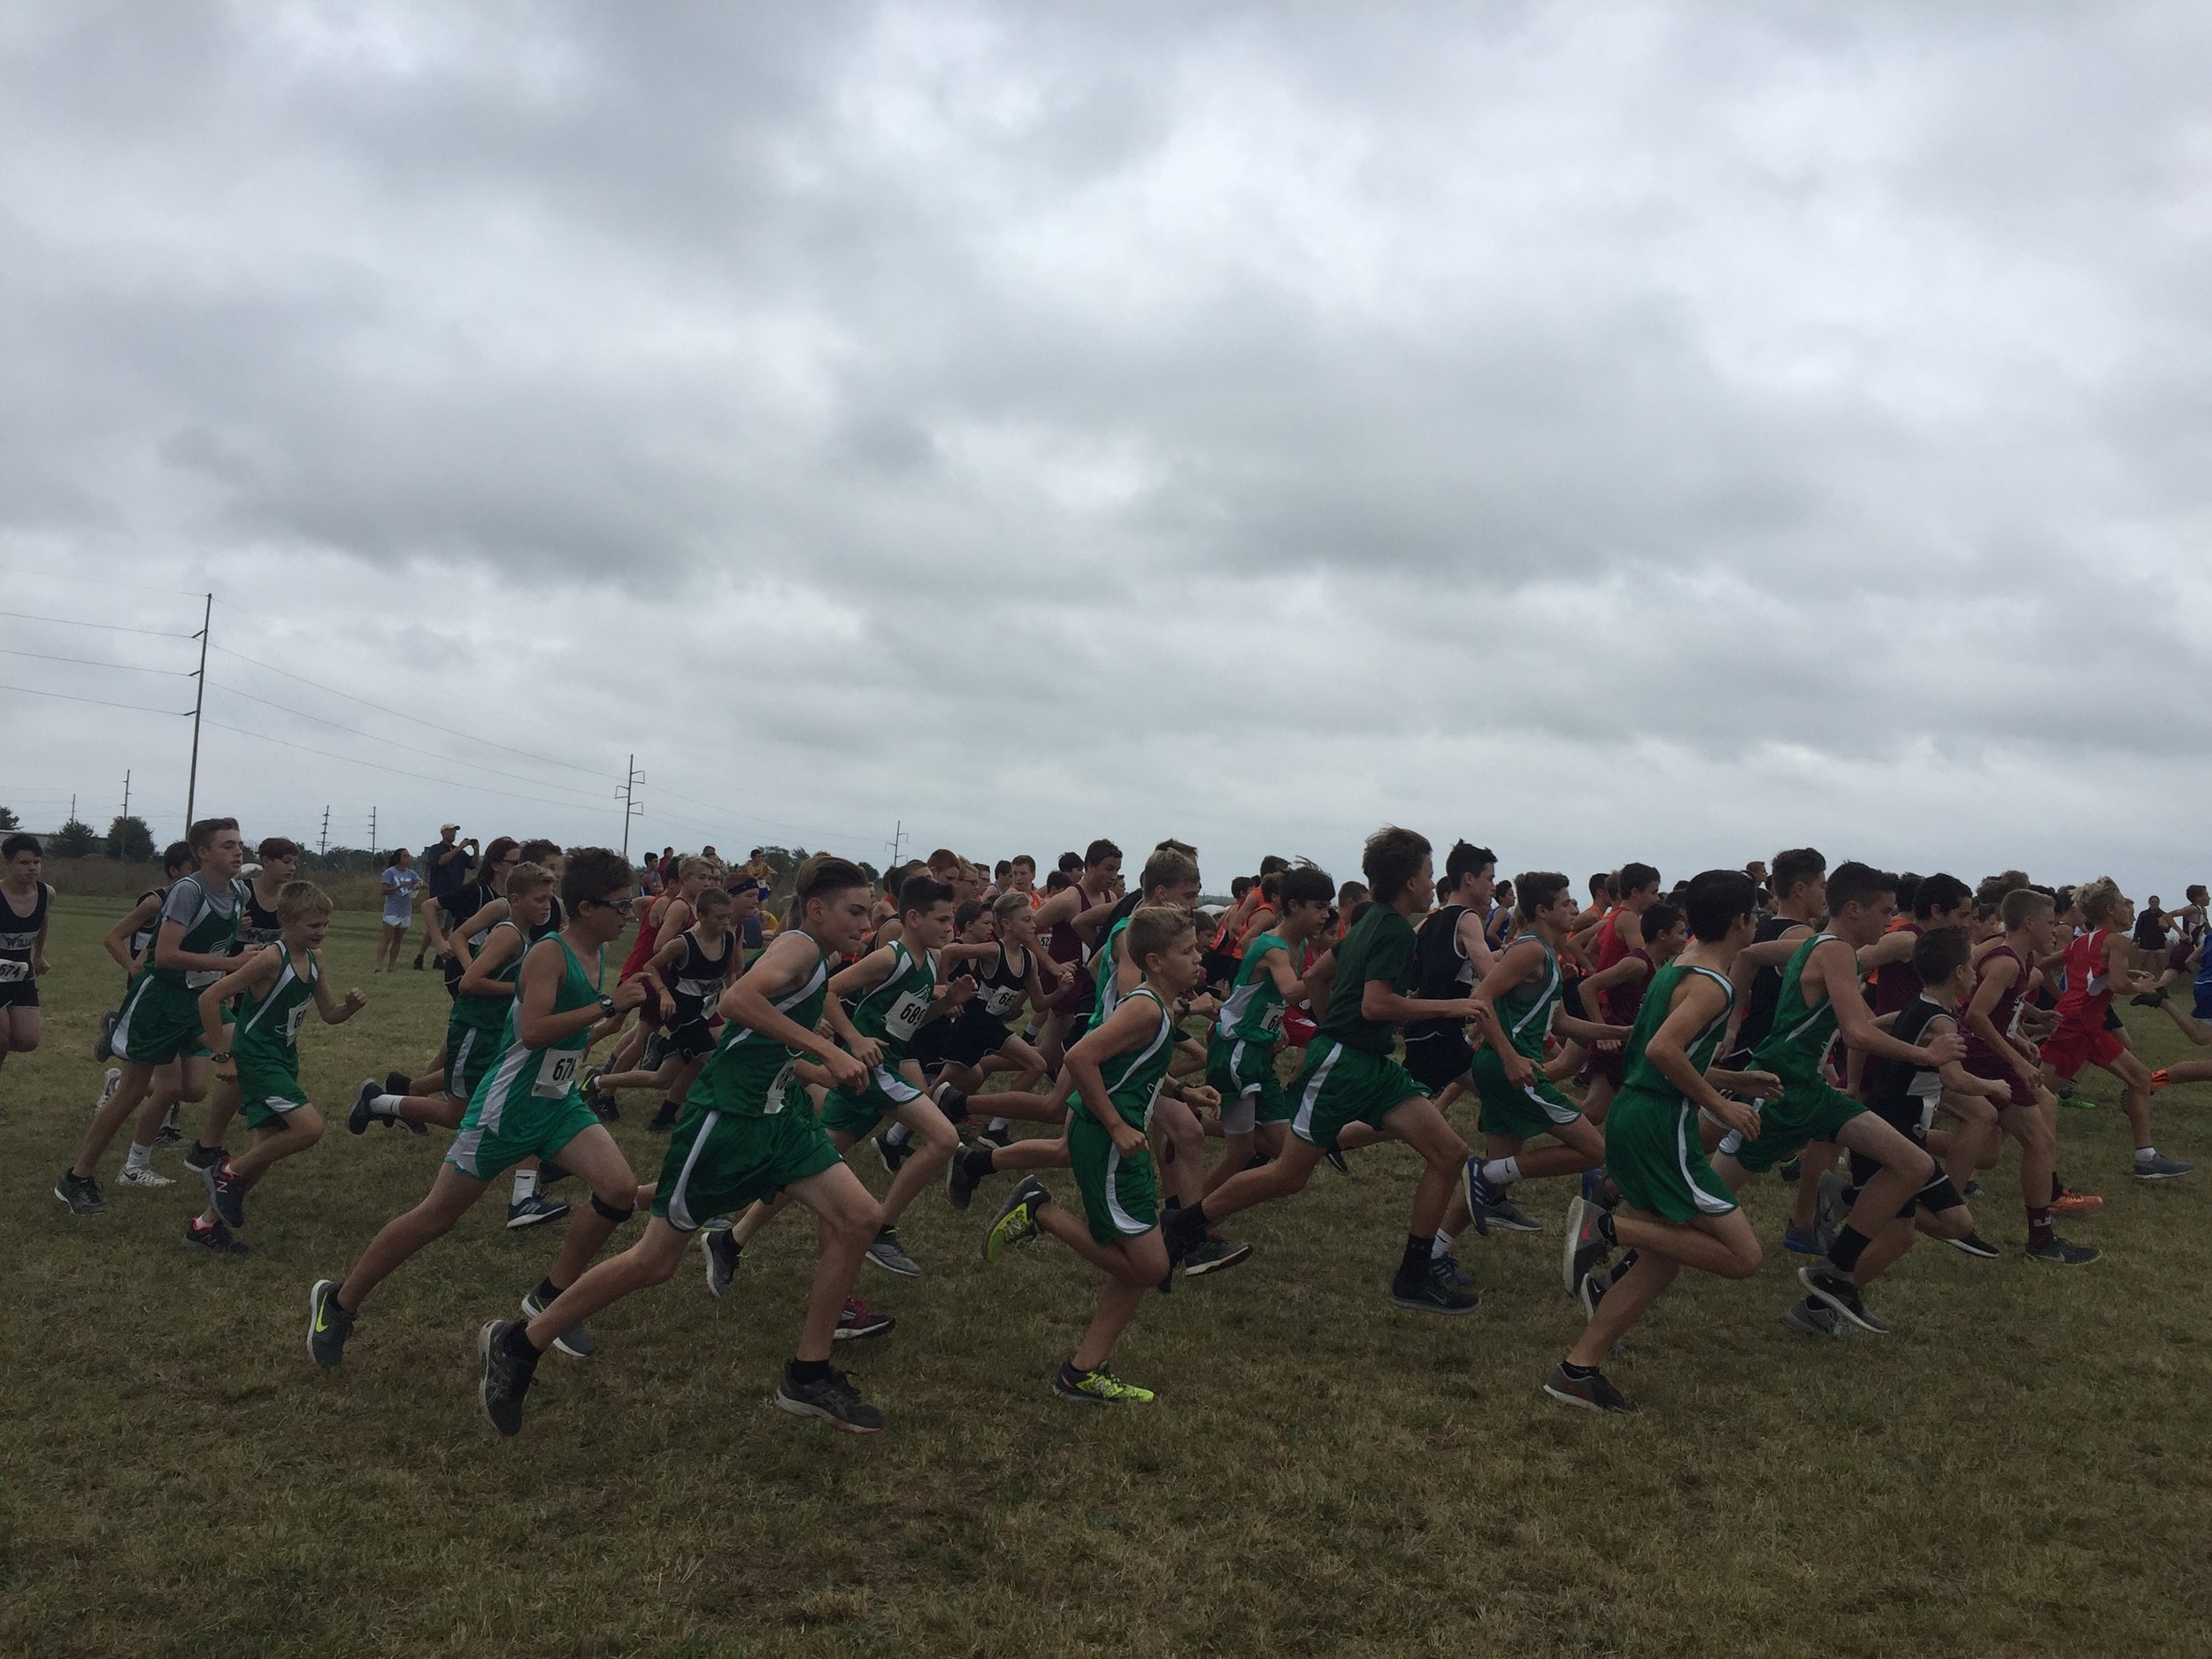  Springfield Underground is the annual site for the Irish Invitational Junior High and High School Cross Country meet.   